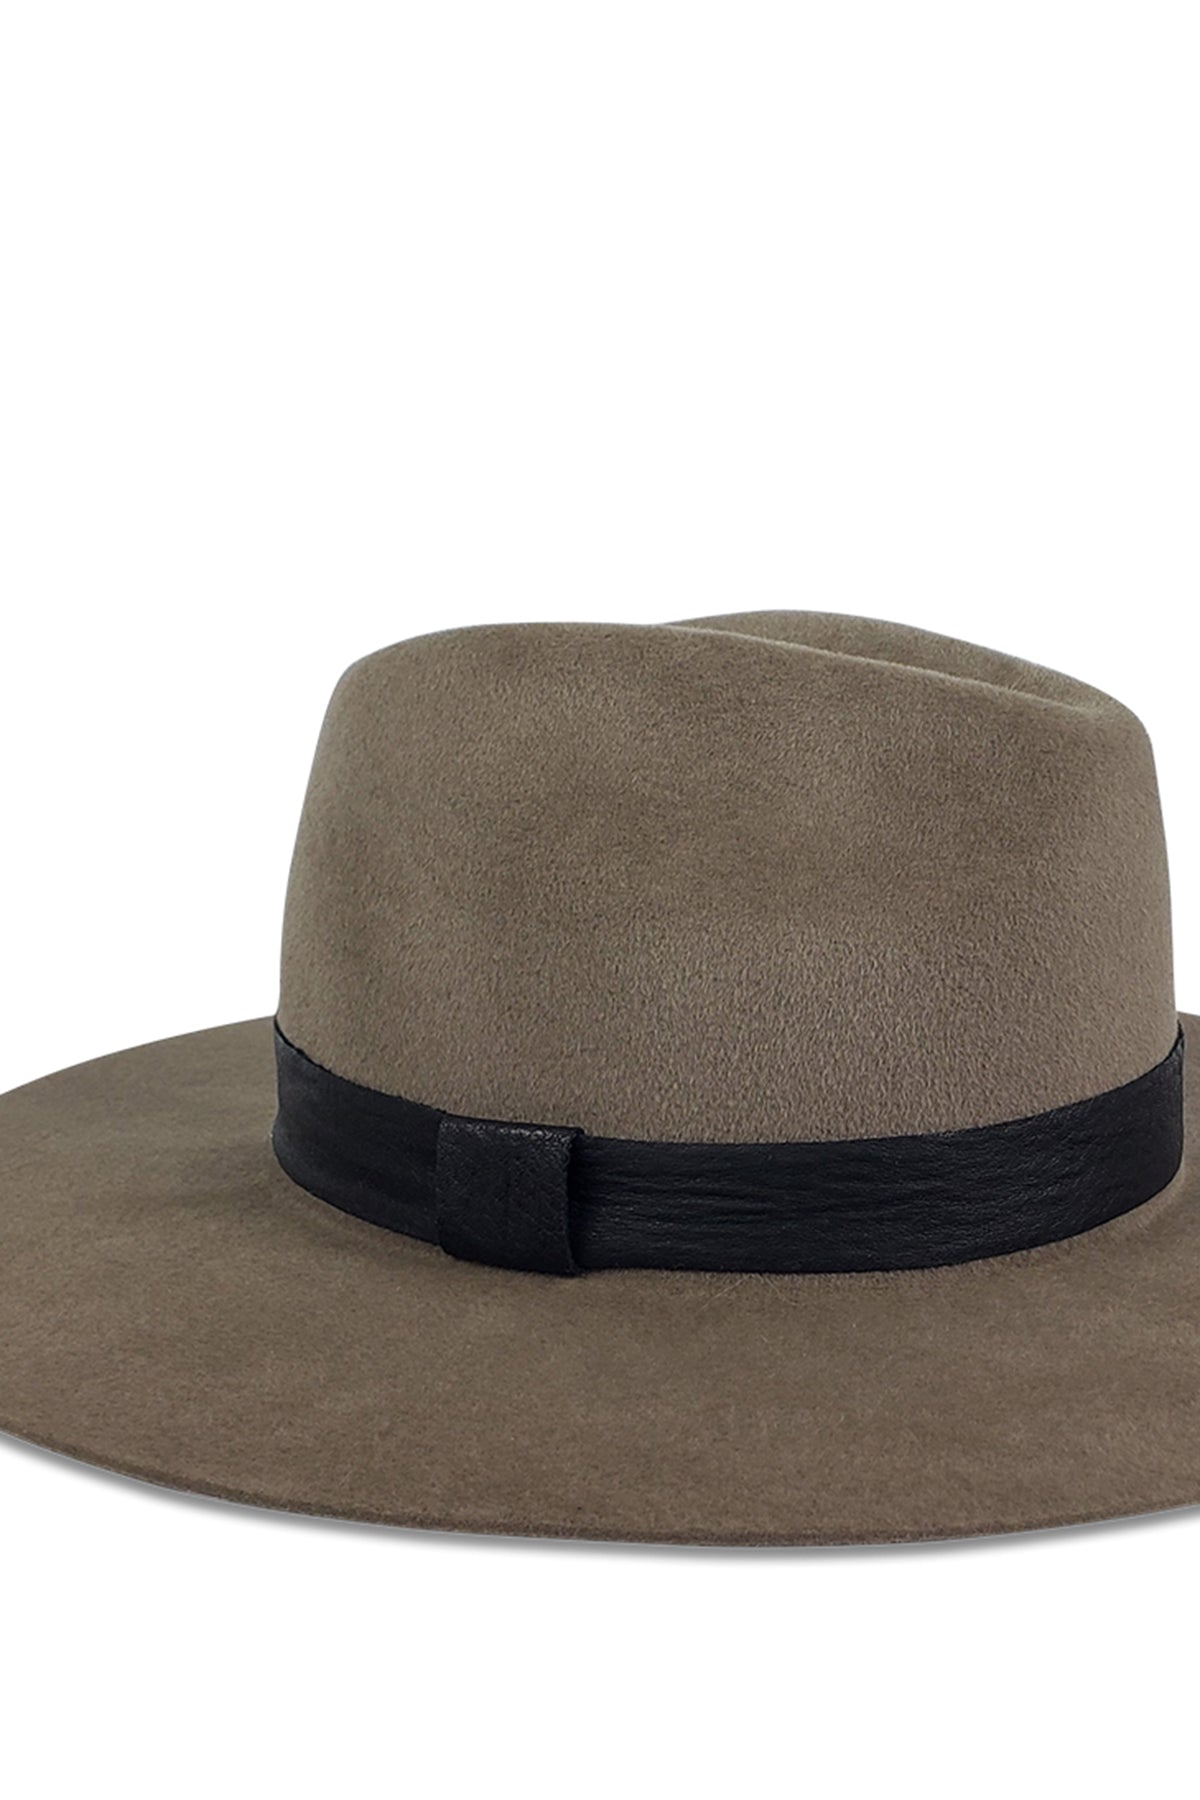 A timeless Luxe Ava Fedora hat with a black band on a white background by Velvet by Graham & Spencer.-8031441158225